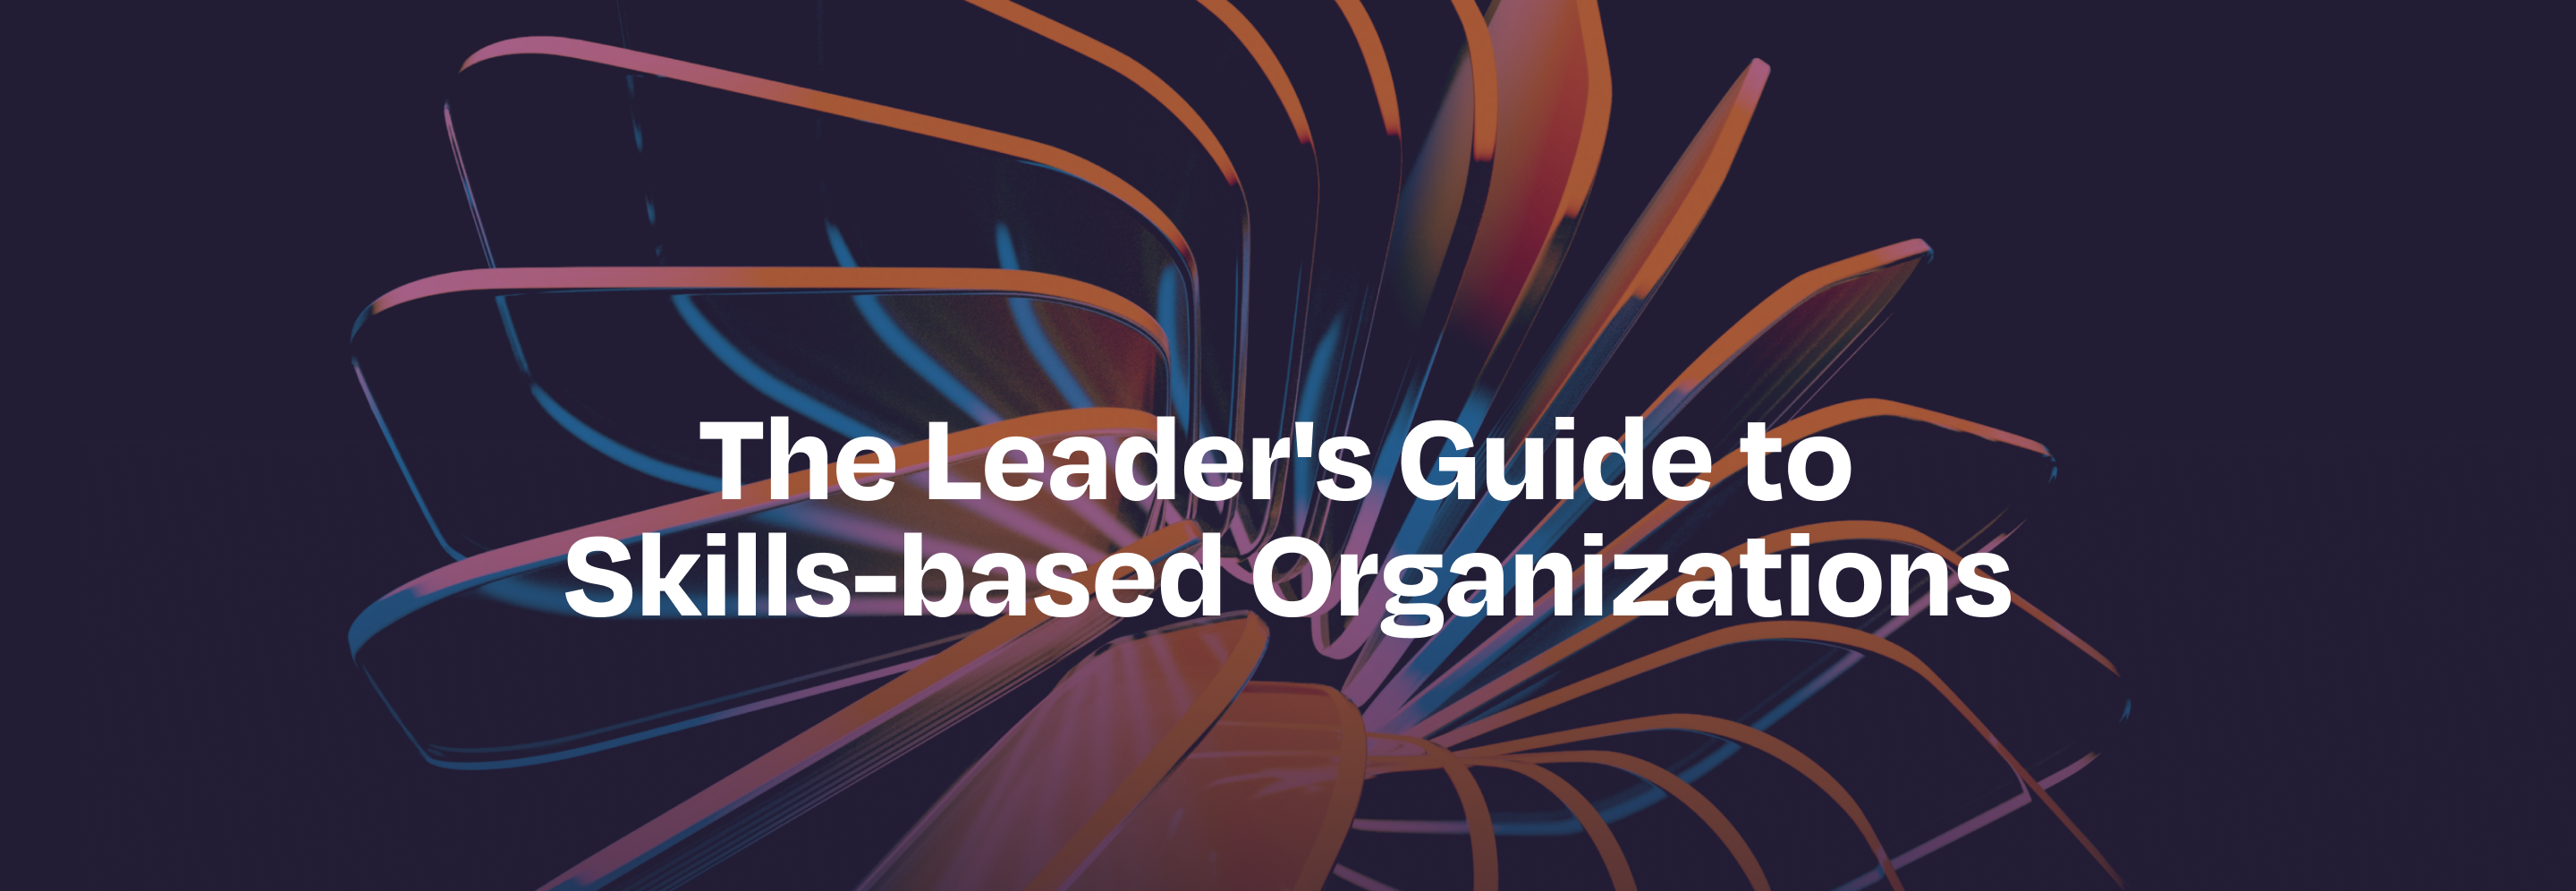 The Leader's Guide to Skills-based Organizations